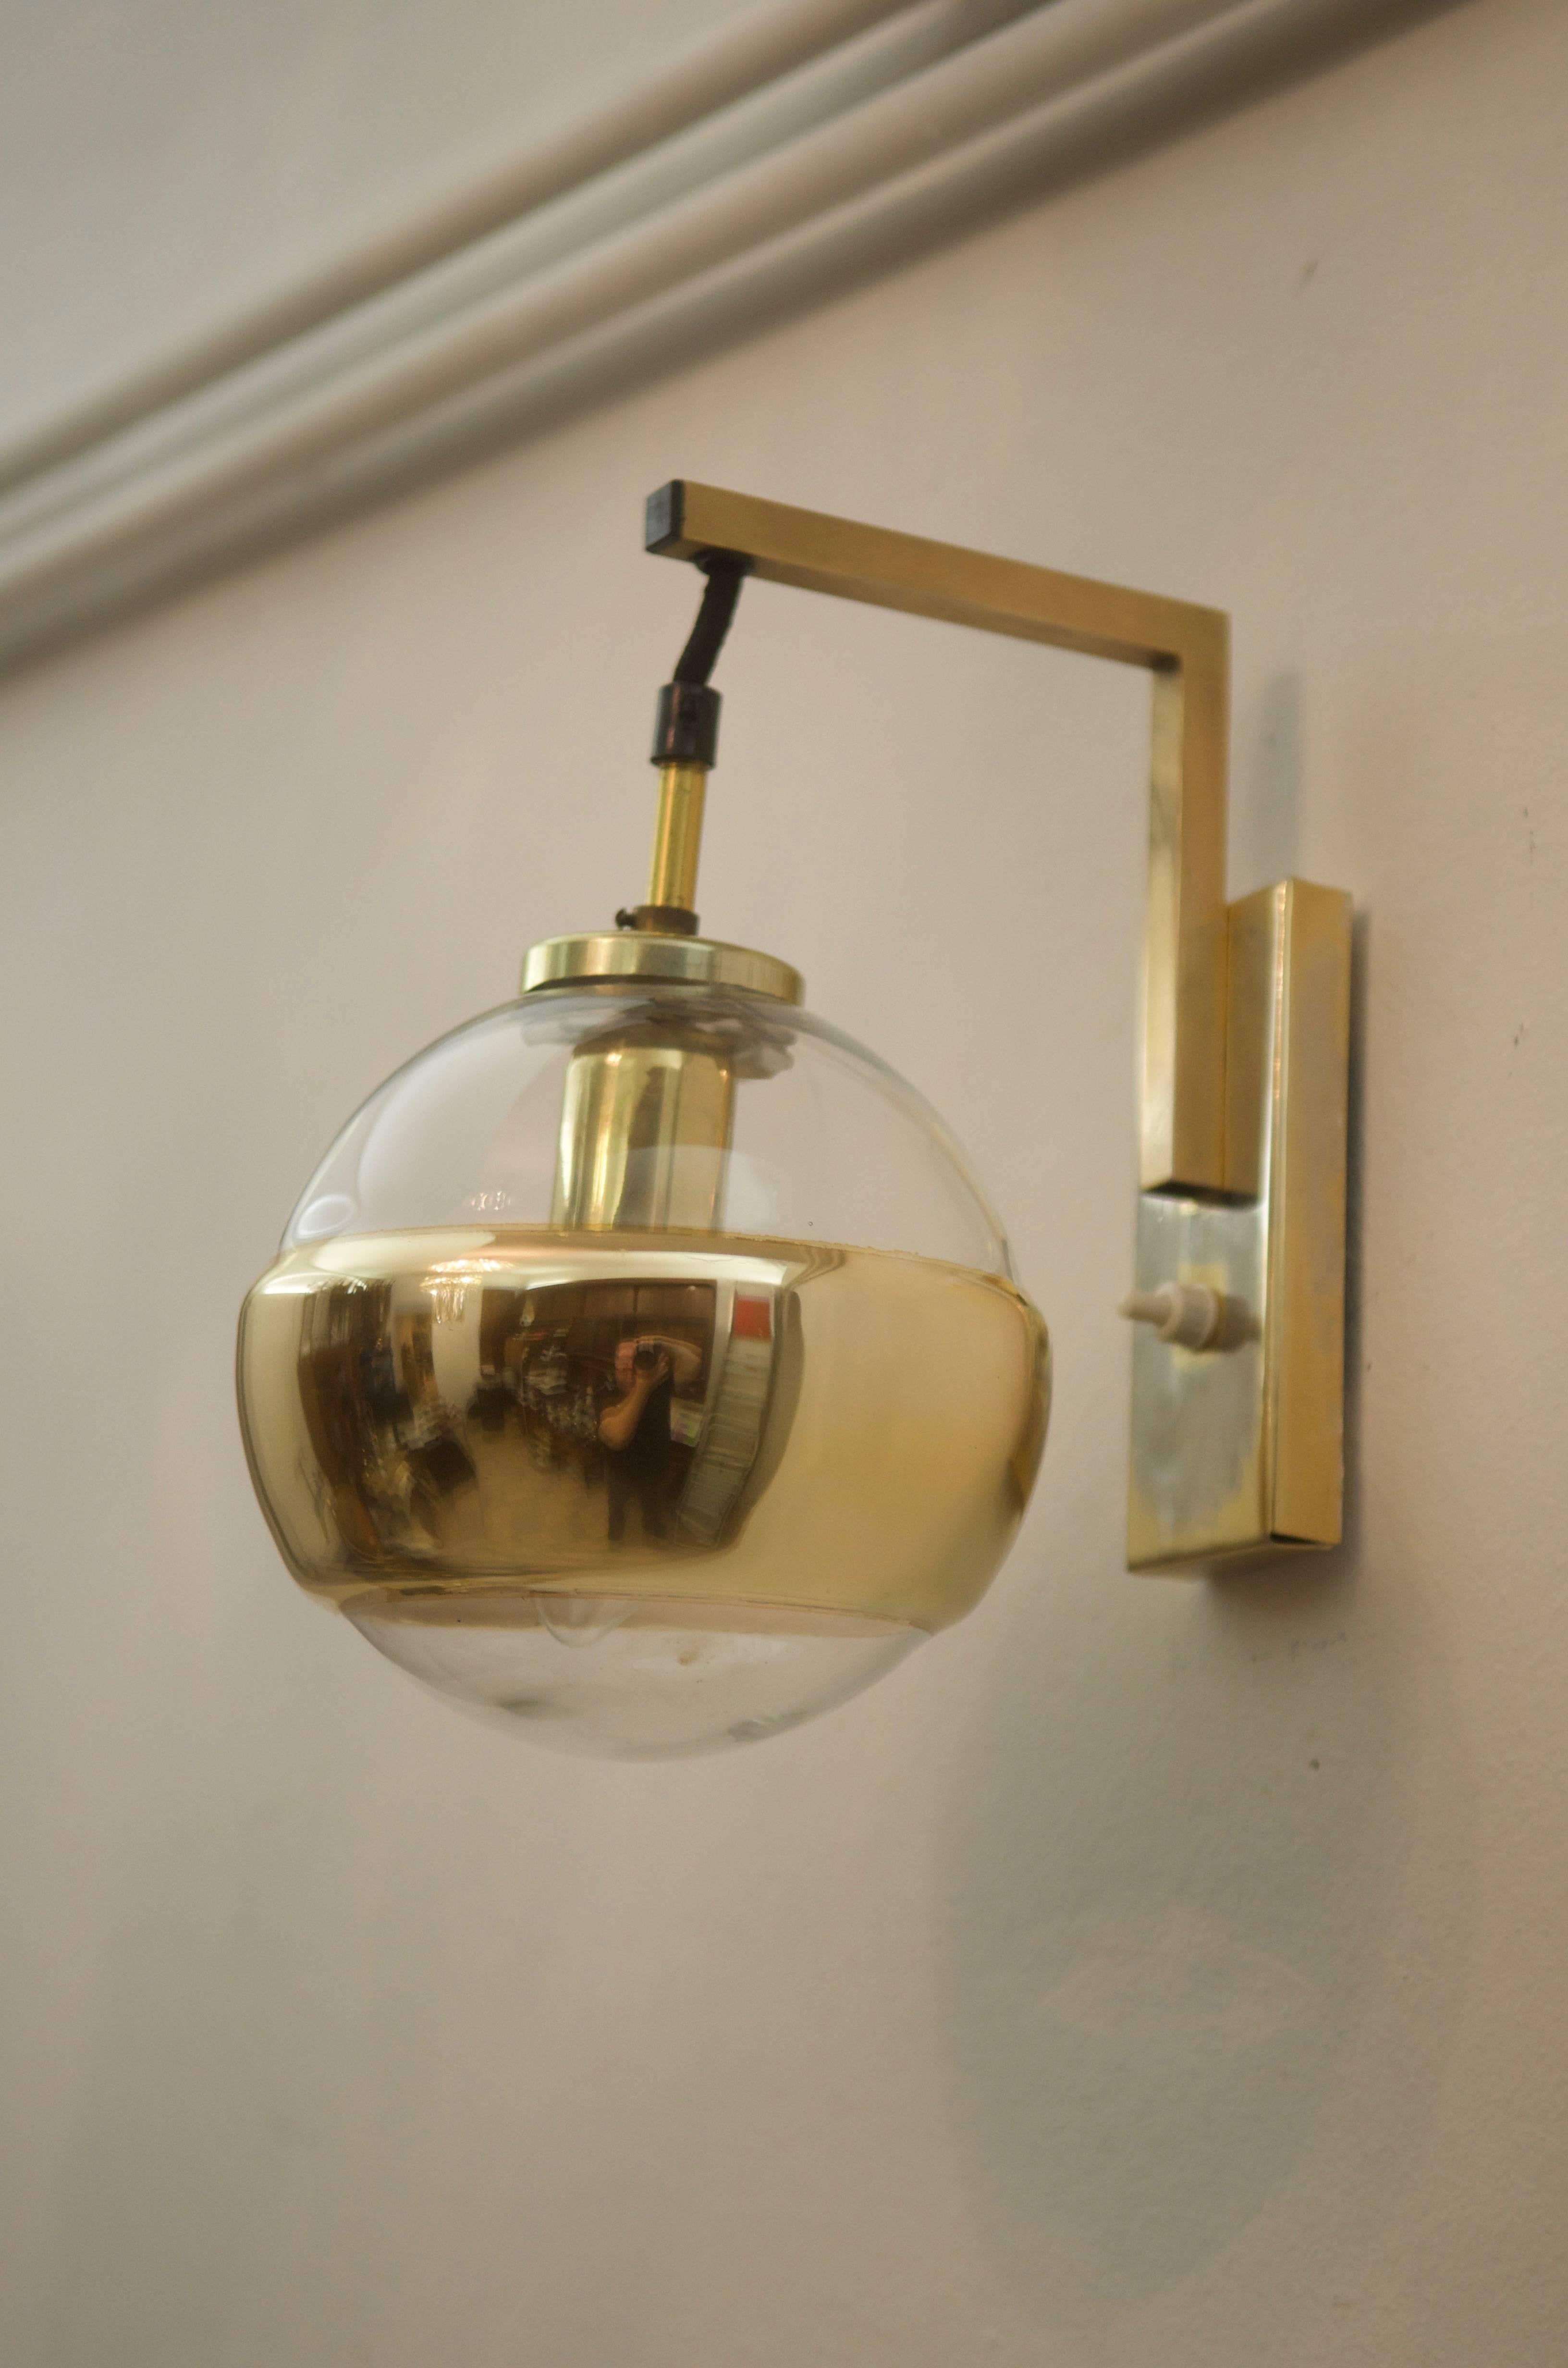 Steel frame with glass globe with gold strip fitted with one e14 socket.
Made in Germany by Peill & Putzler in the 1960s.
   
  